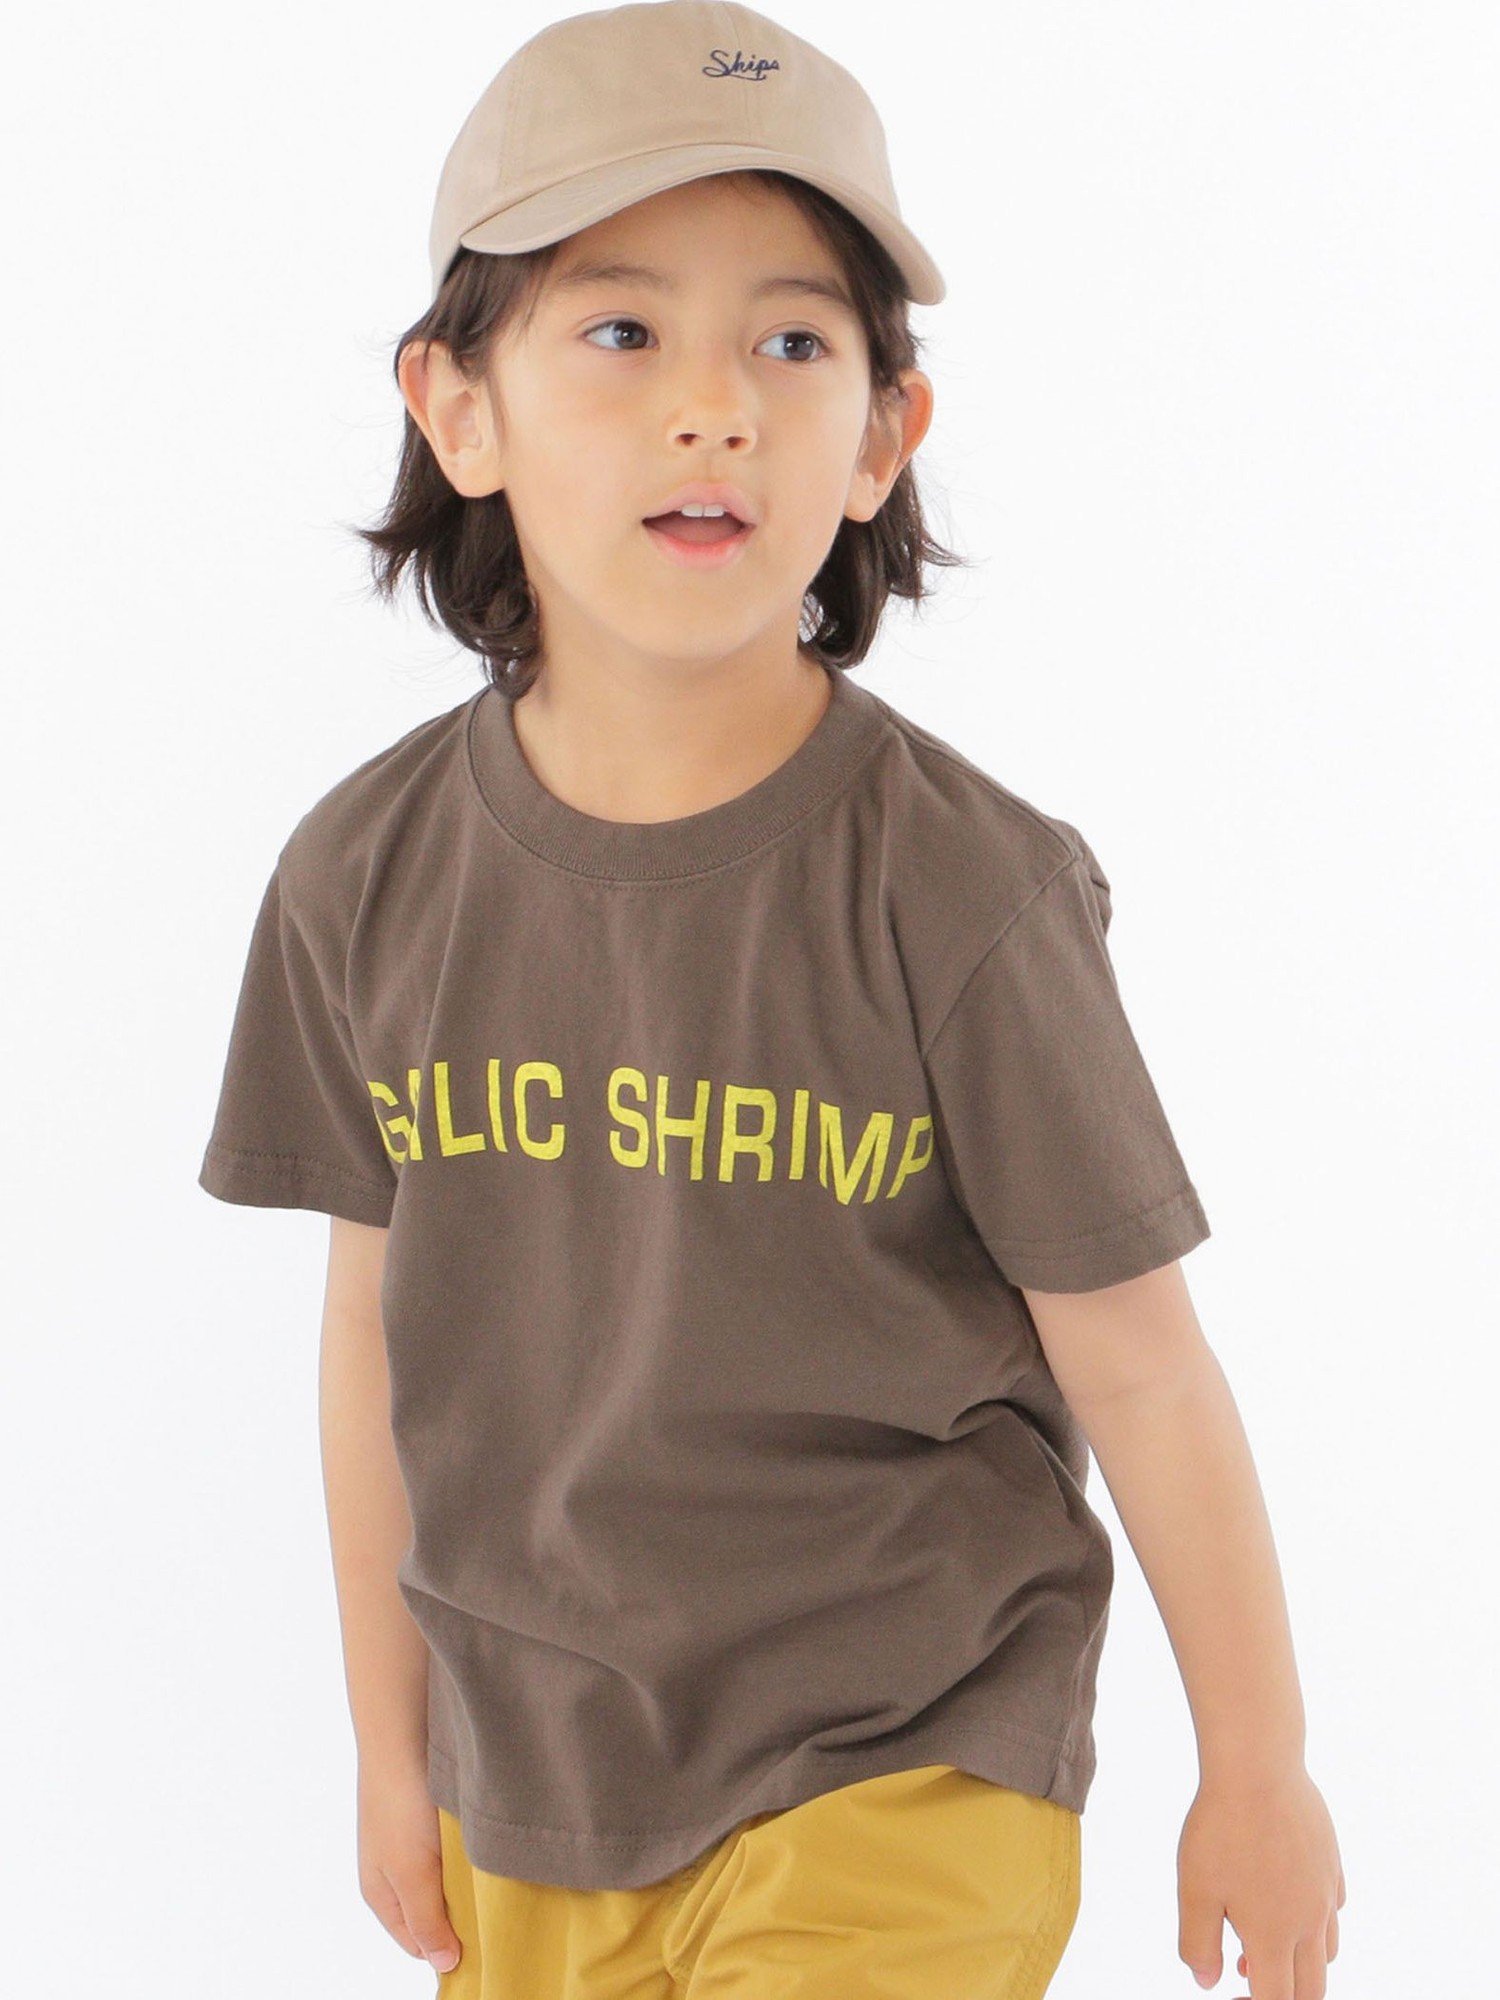 【SALE／50%OFF】SHIPS KIDS 【SHIPS KIDS別注】THE DAY ON THE BEACH:ガーリック シュリンプ TEE 100~150cm シップス トップス その他のトップス グレー ブルー